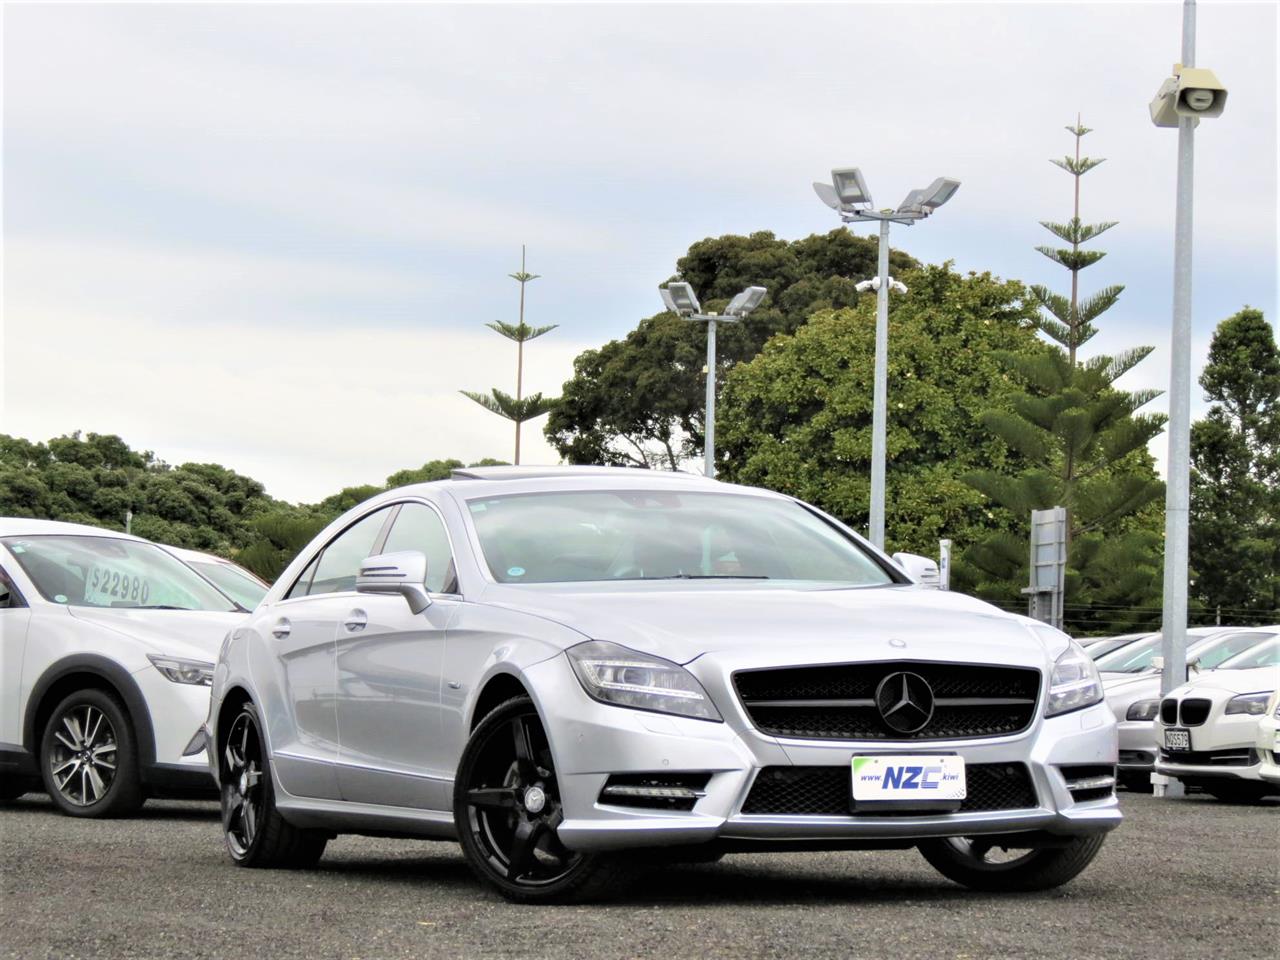 NZC 2011 MERCEDES BENZ CLS 350 just arrived to Auckland